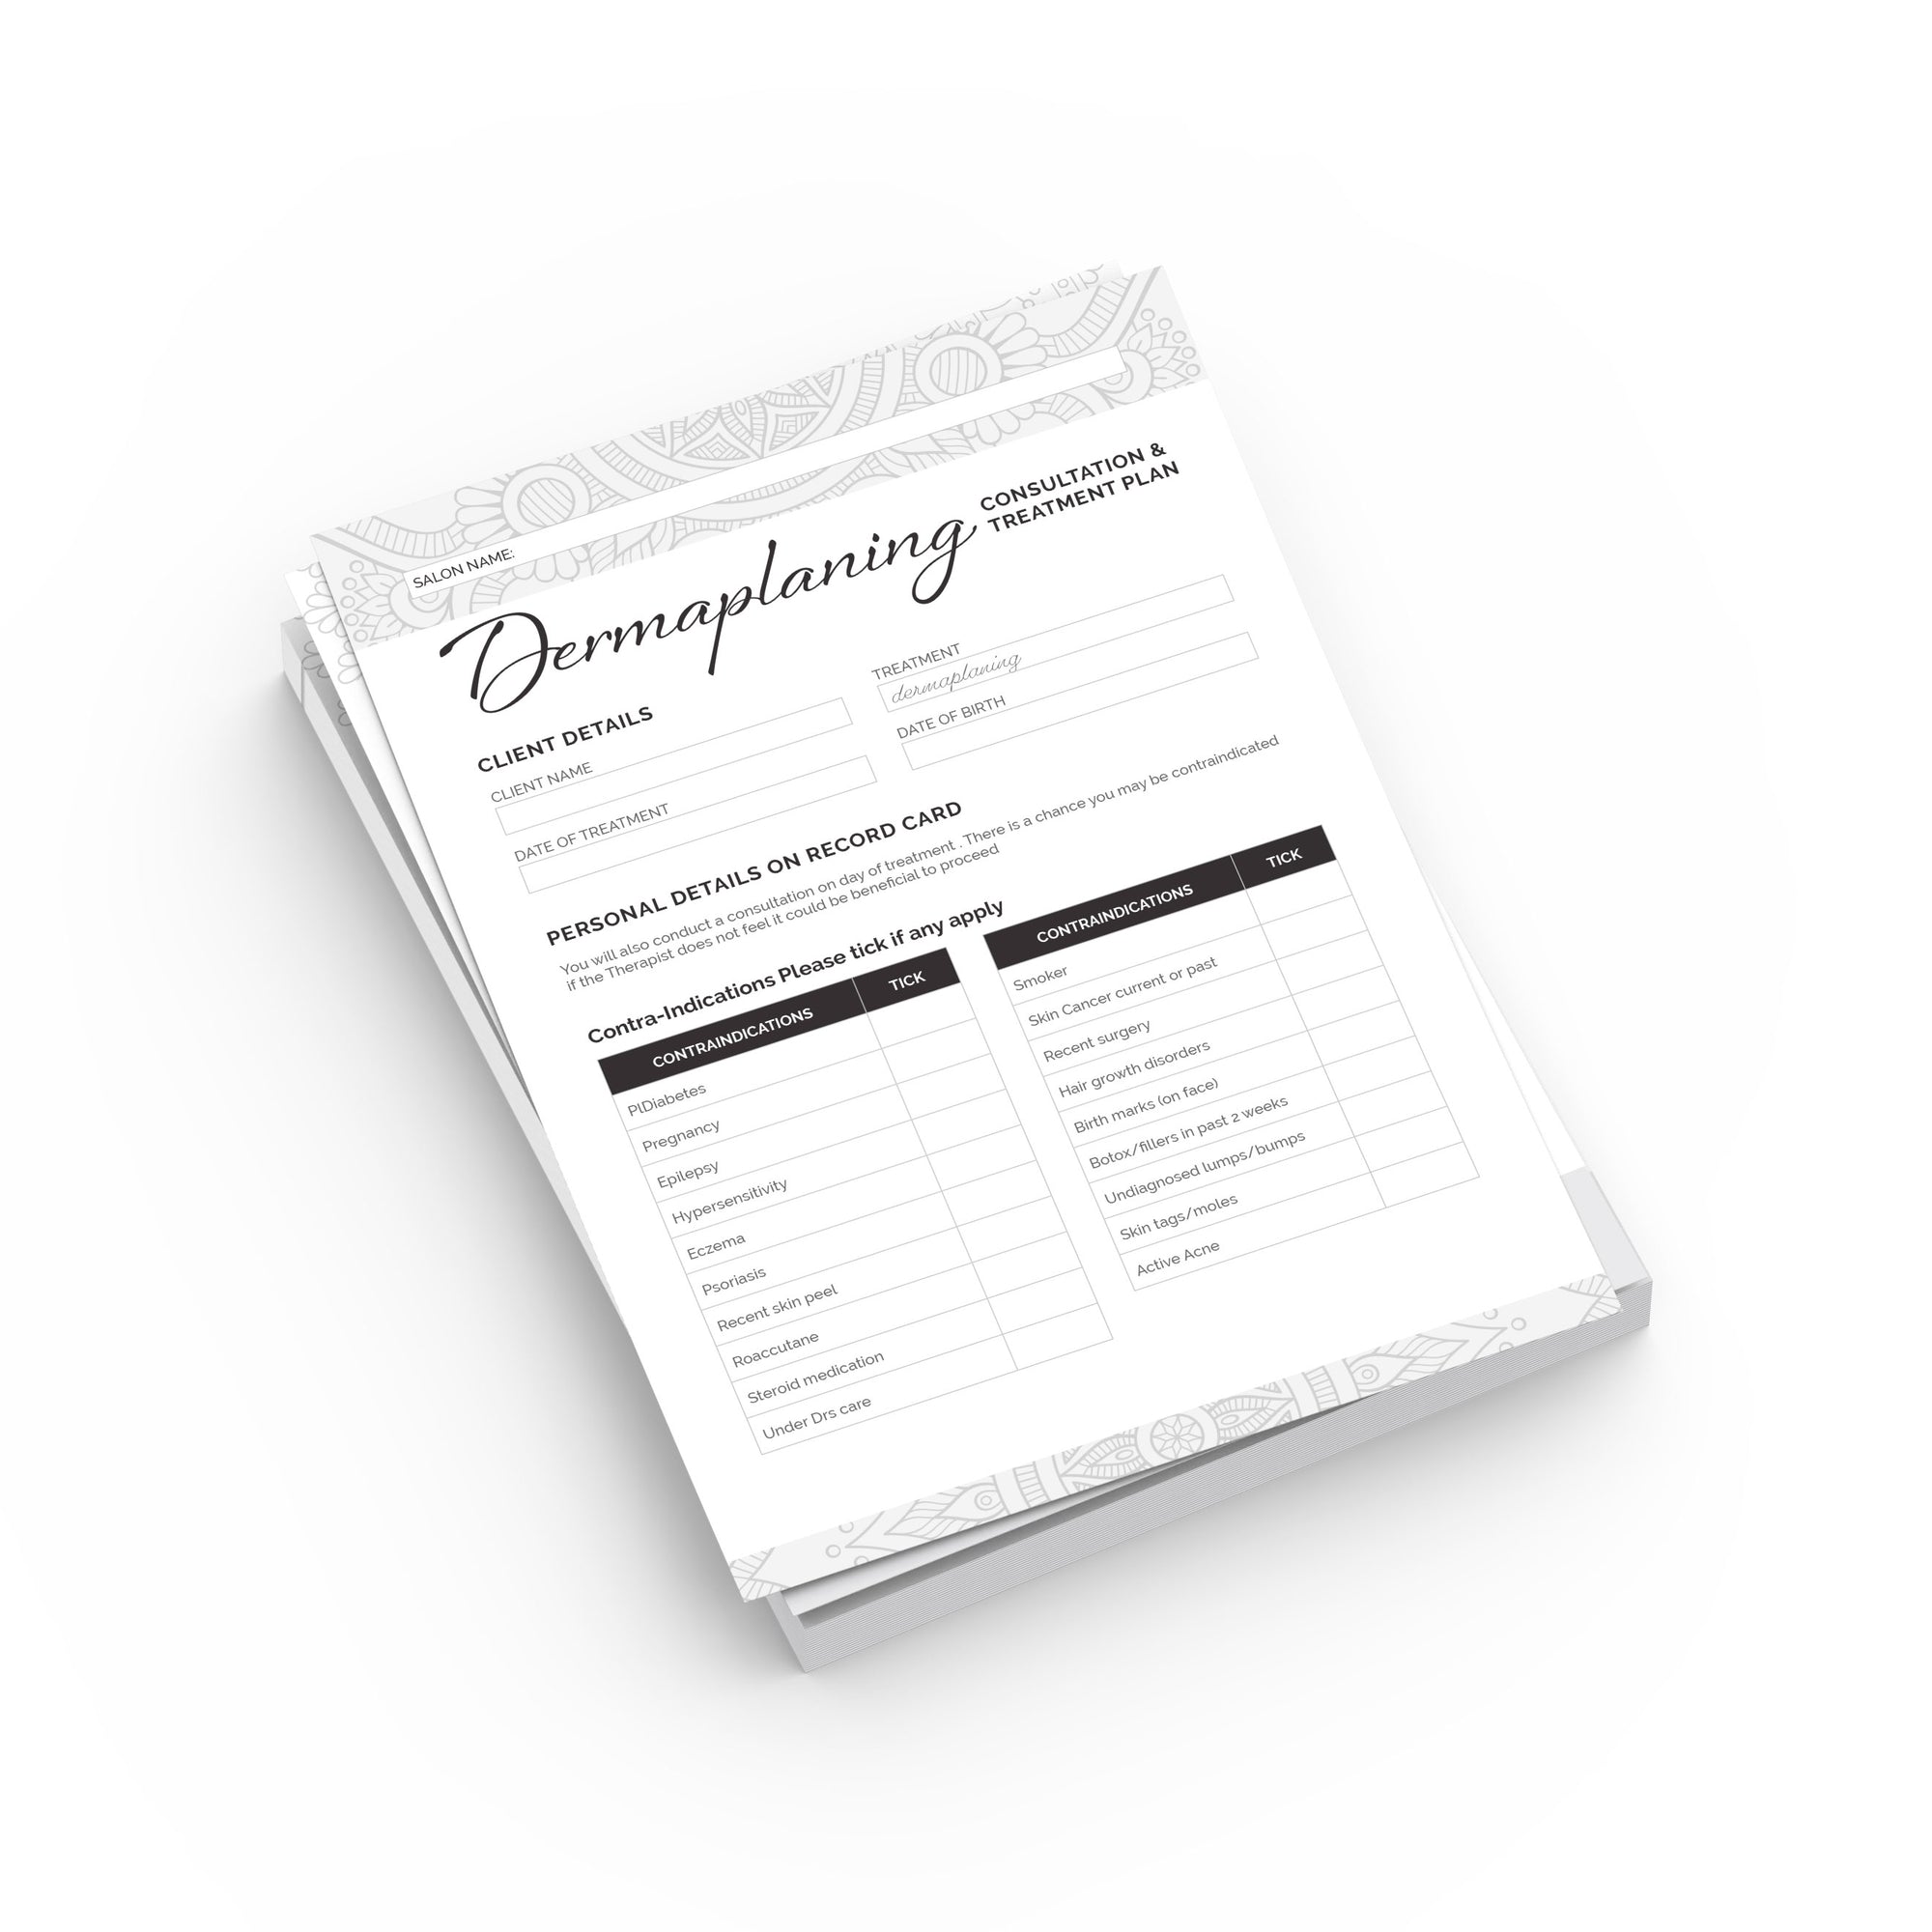 Dermaplaning Consultation & Treatment Cards